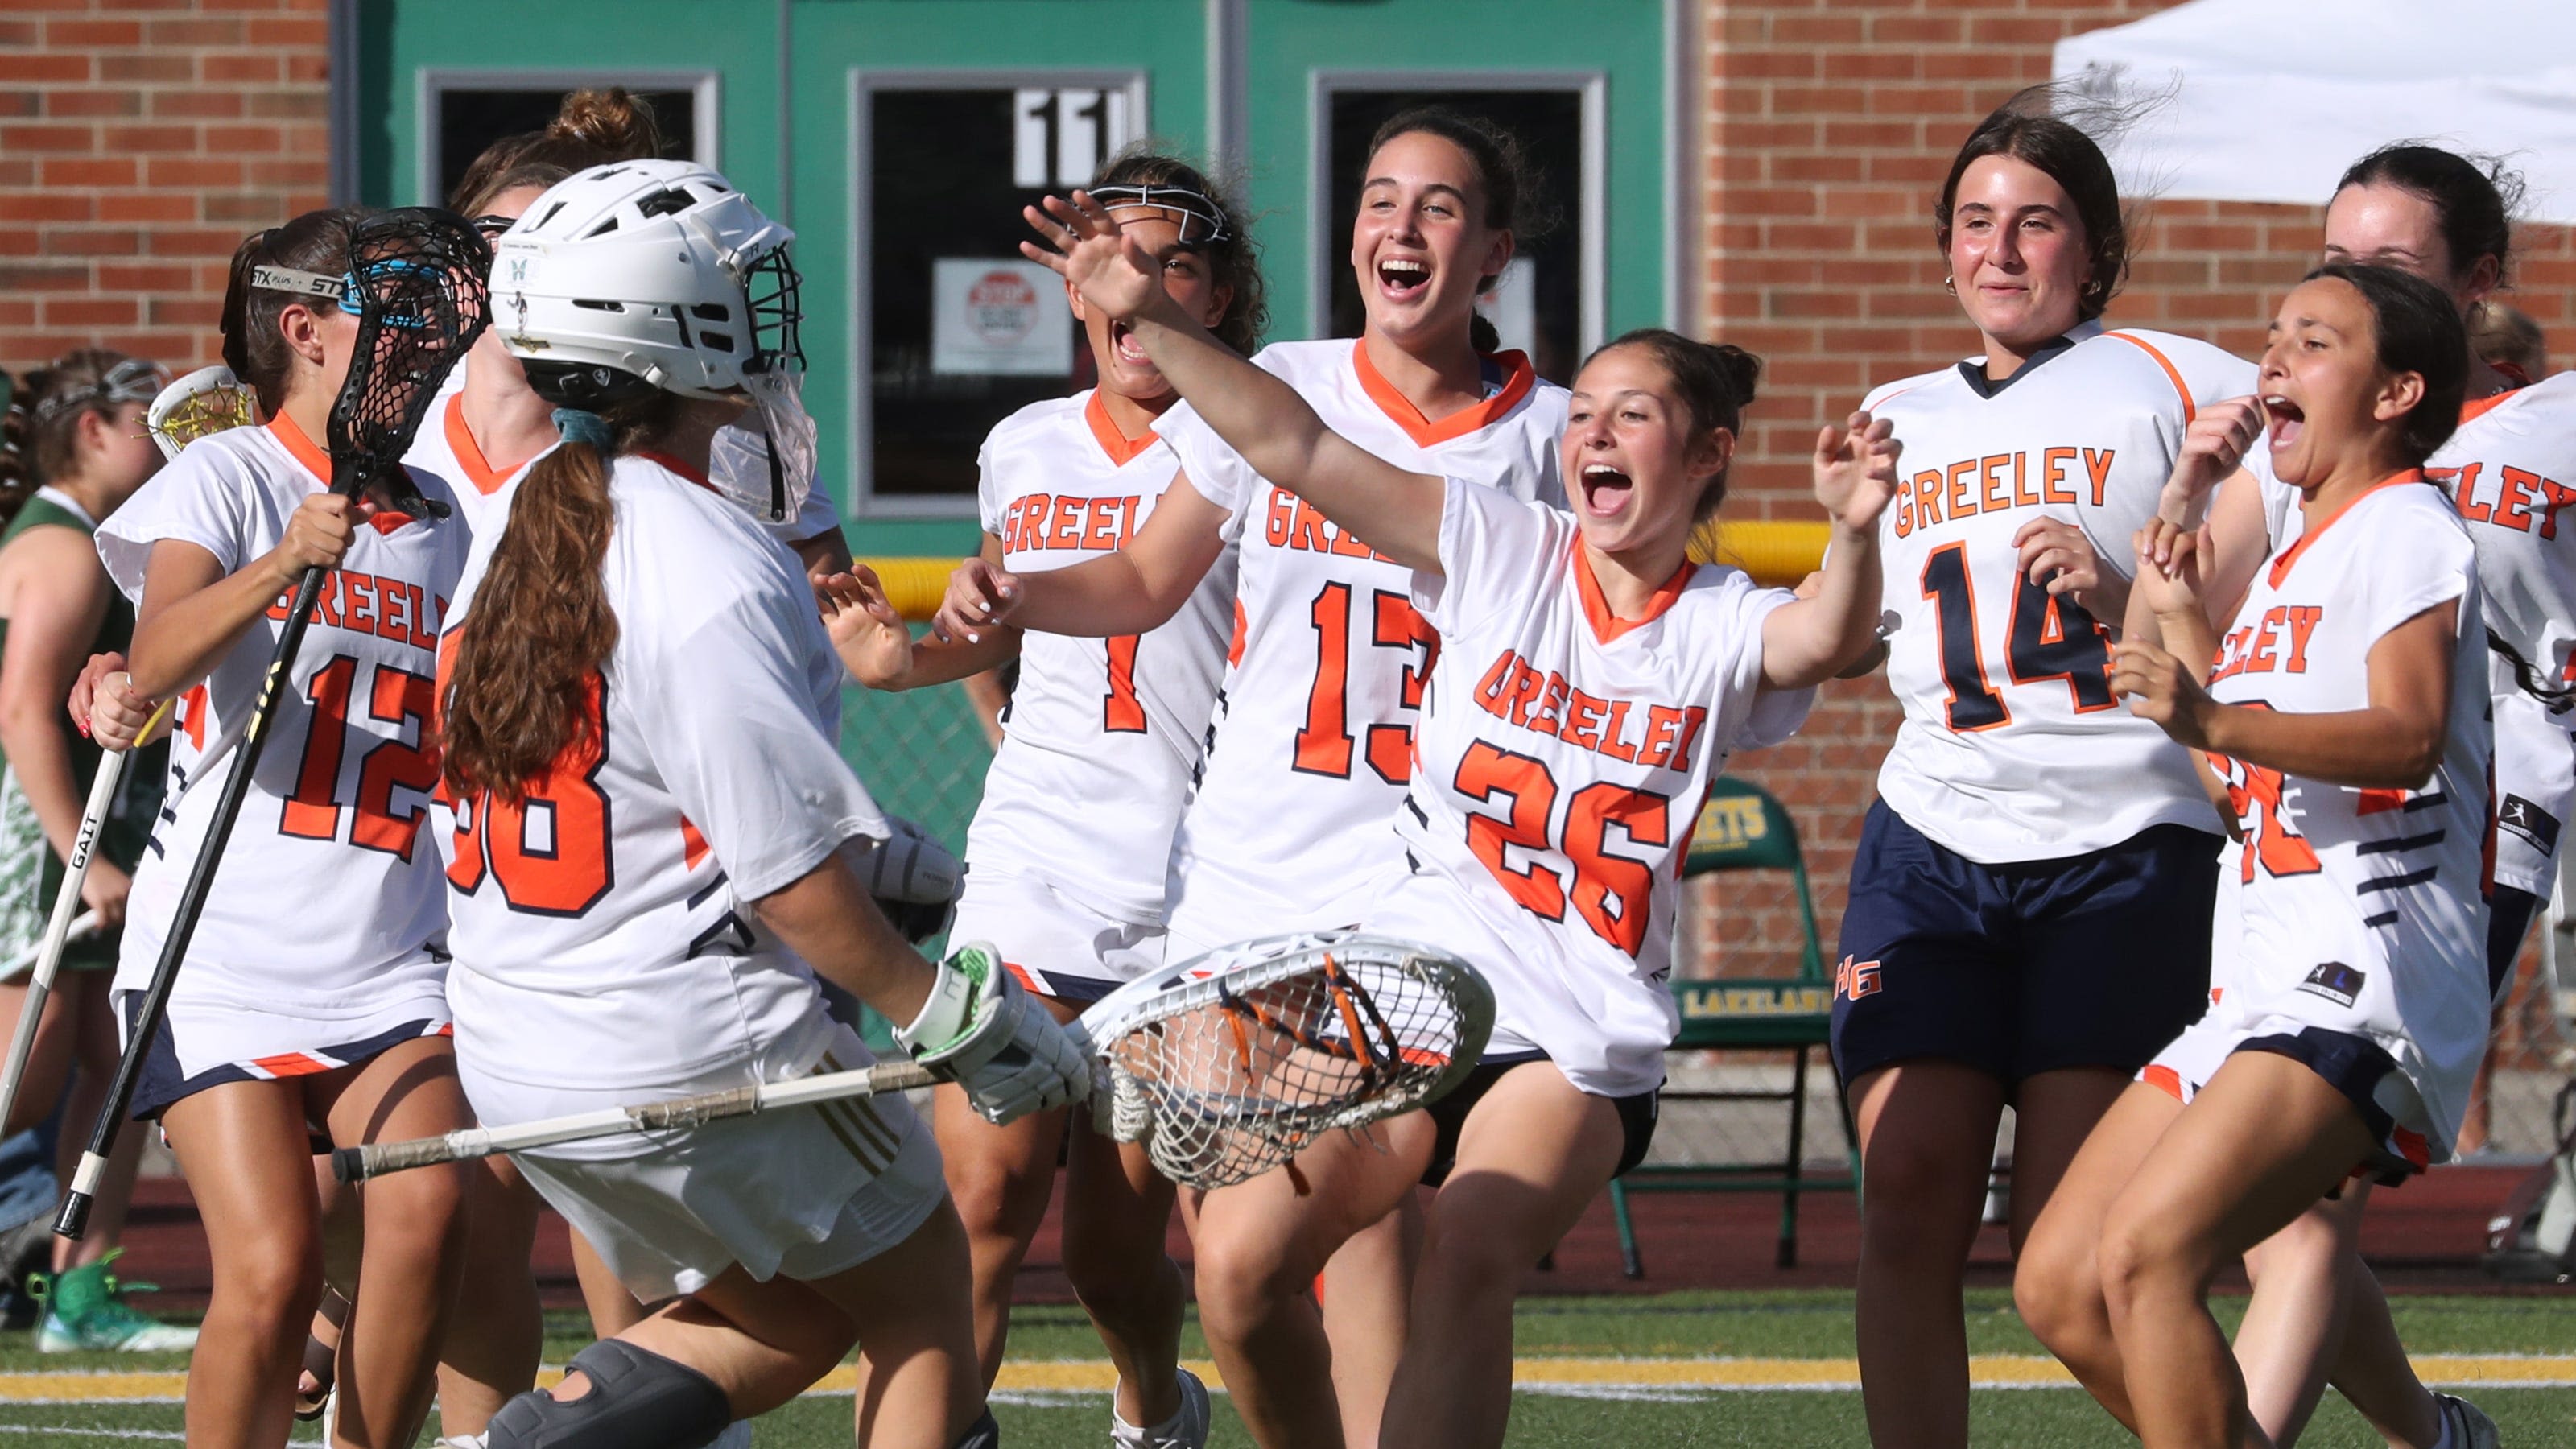 Girls lacrosse: Edson, Bounds Walsh lead Greeley to 9-8 state regional win over Minisink